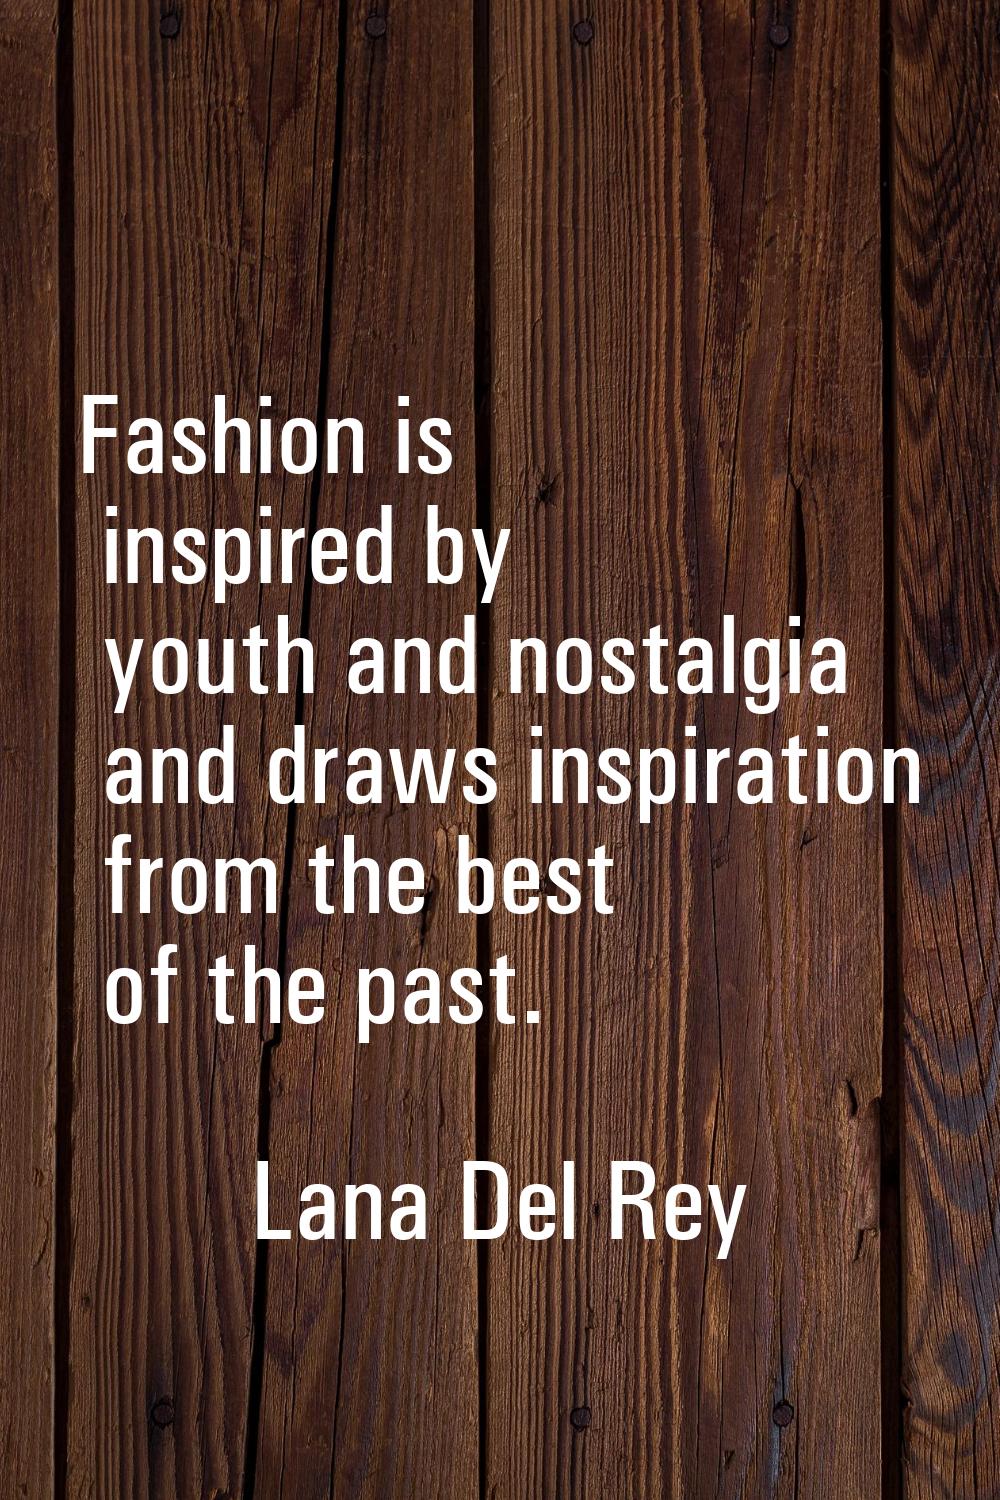 Fashion is inspired by youth and nostalgia and draws inspiration from the best of the past.